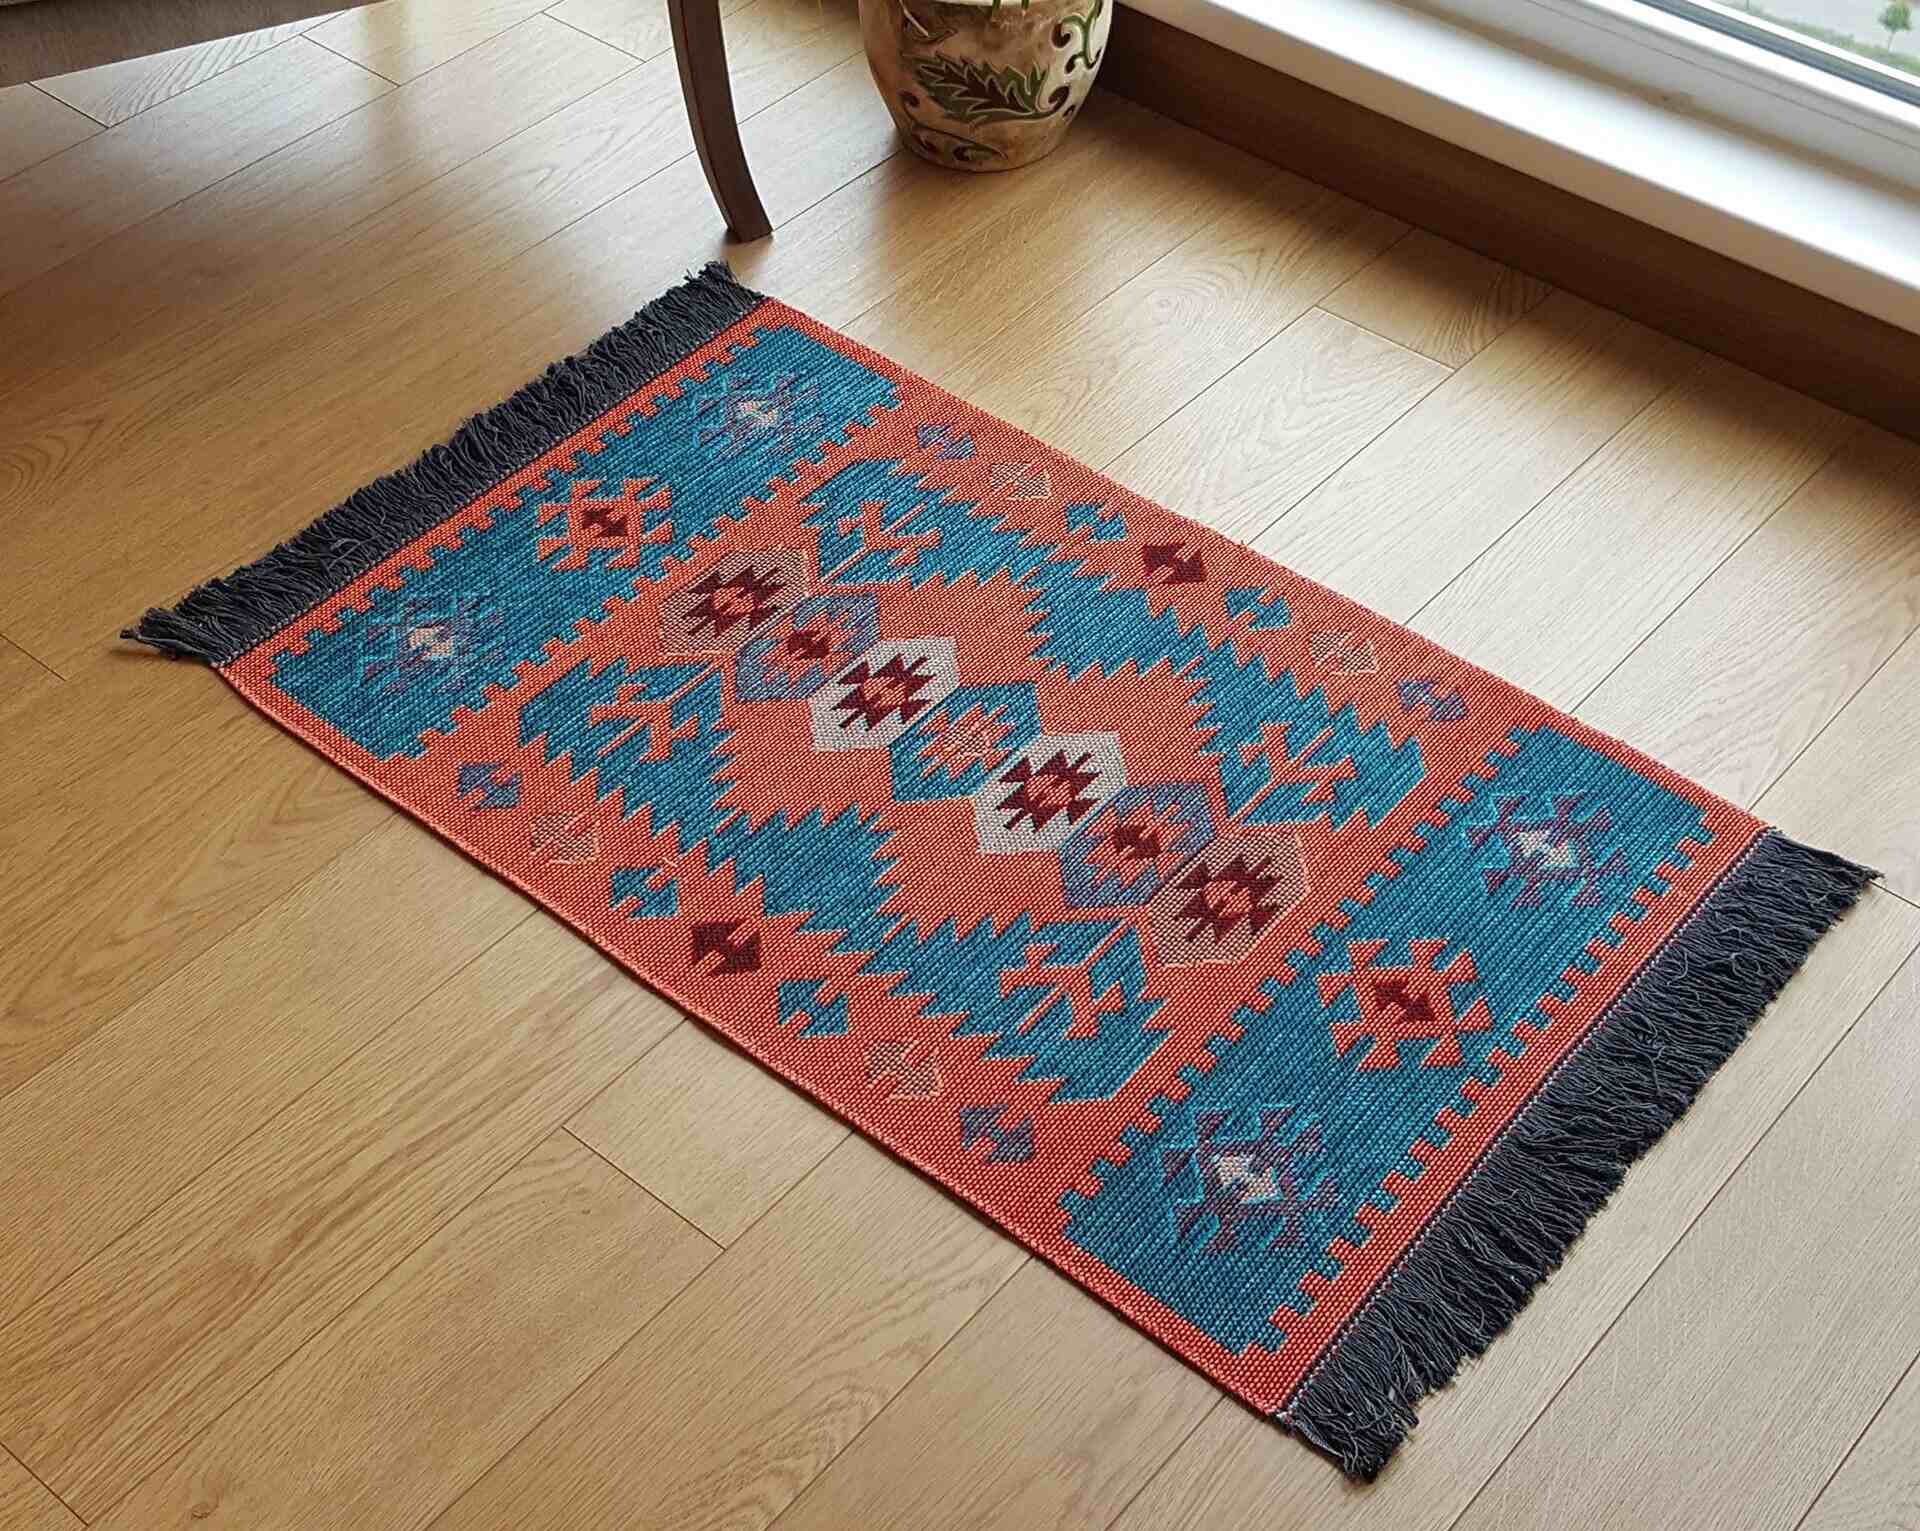 13 Unbelievable Small Rugs for 2023